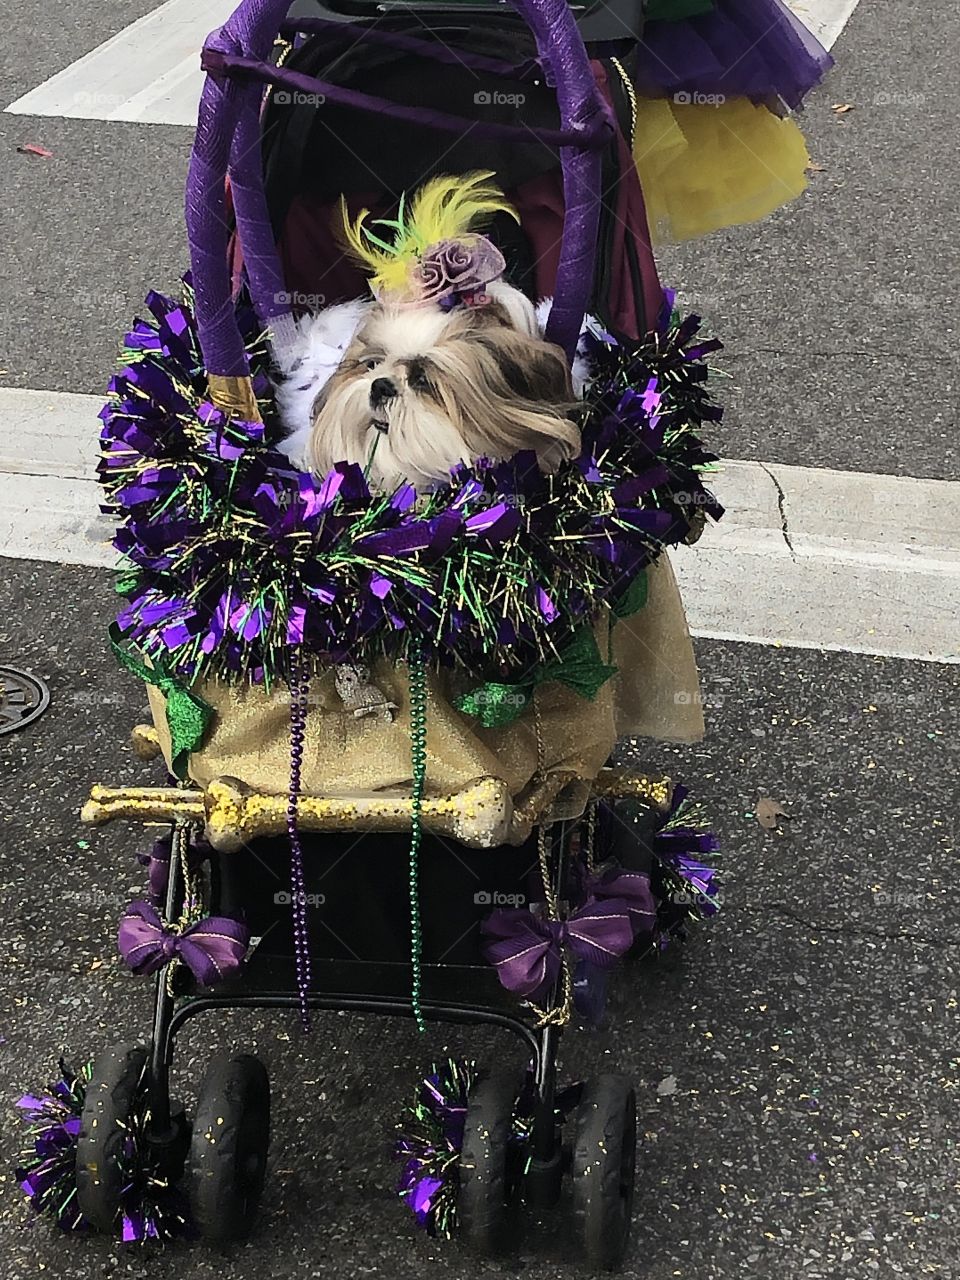 Cute doggy in stroller at parade 